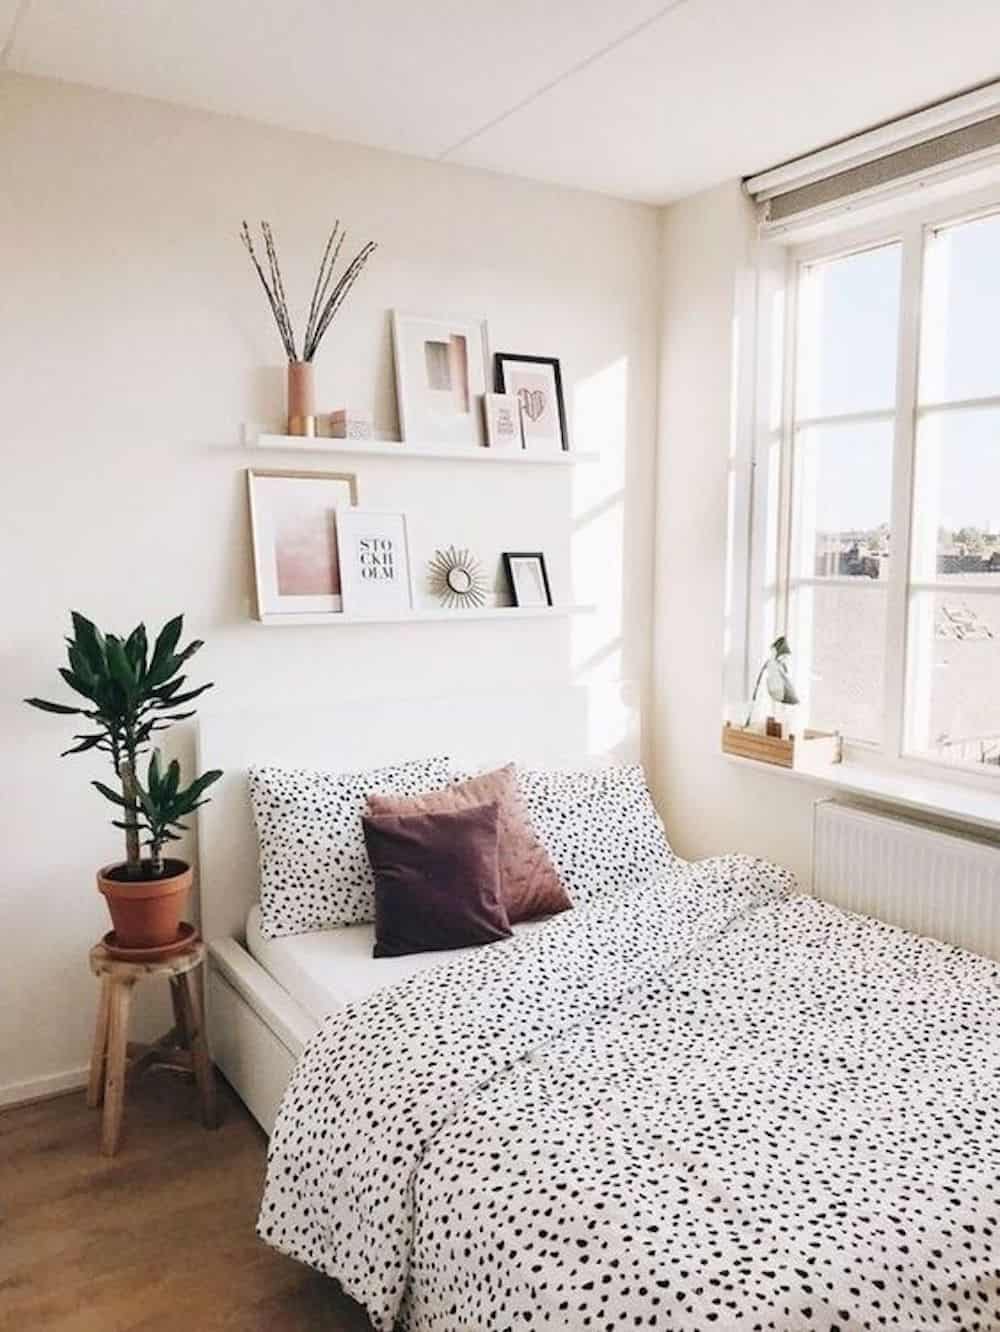 30 College Dorm Room Ideas To Give You Inspiration This Year!